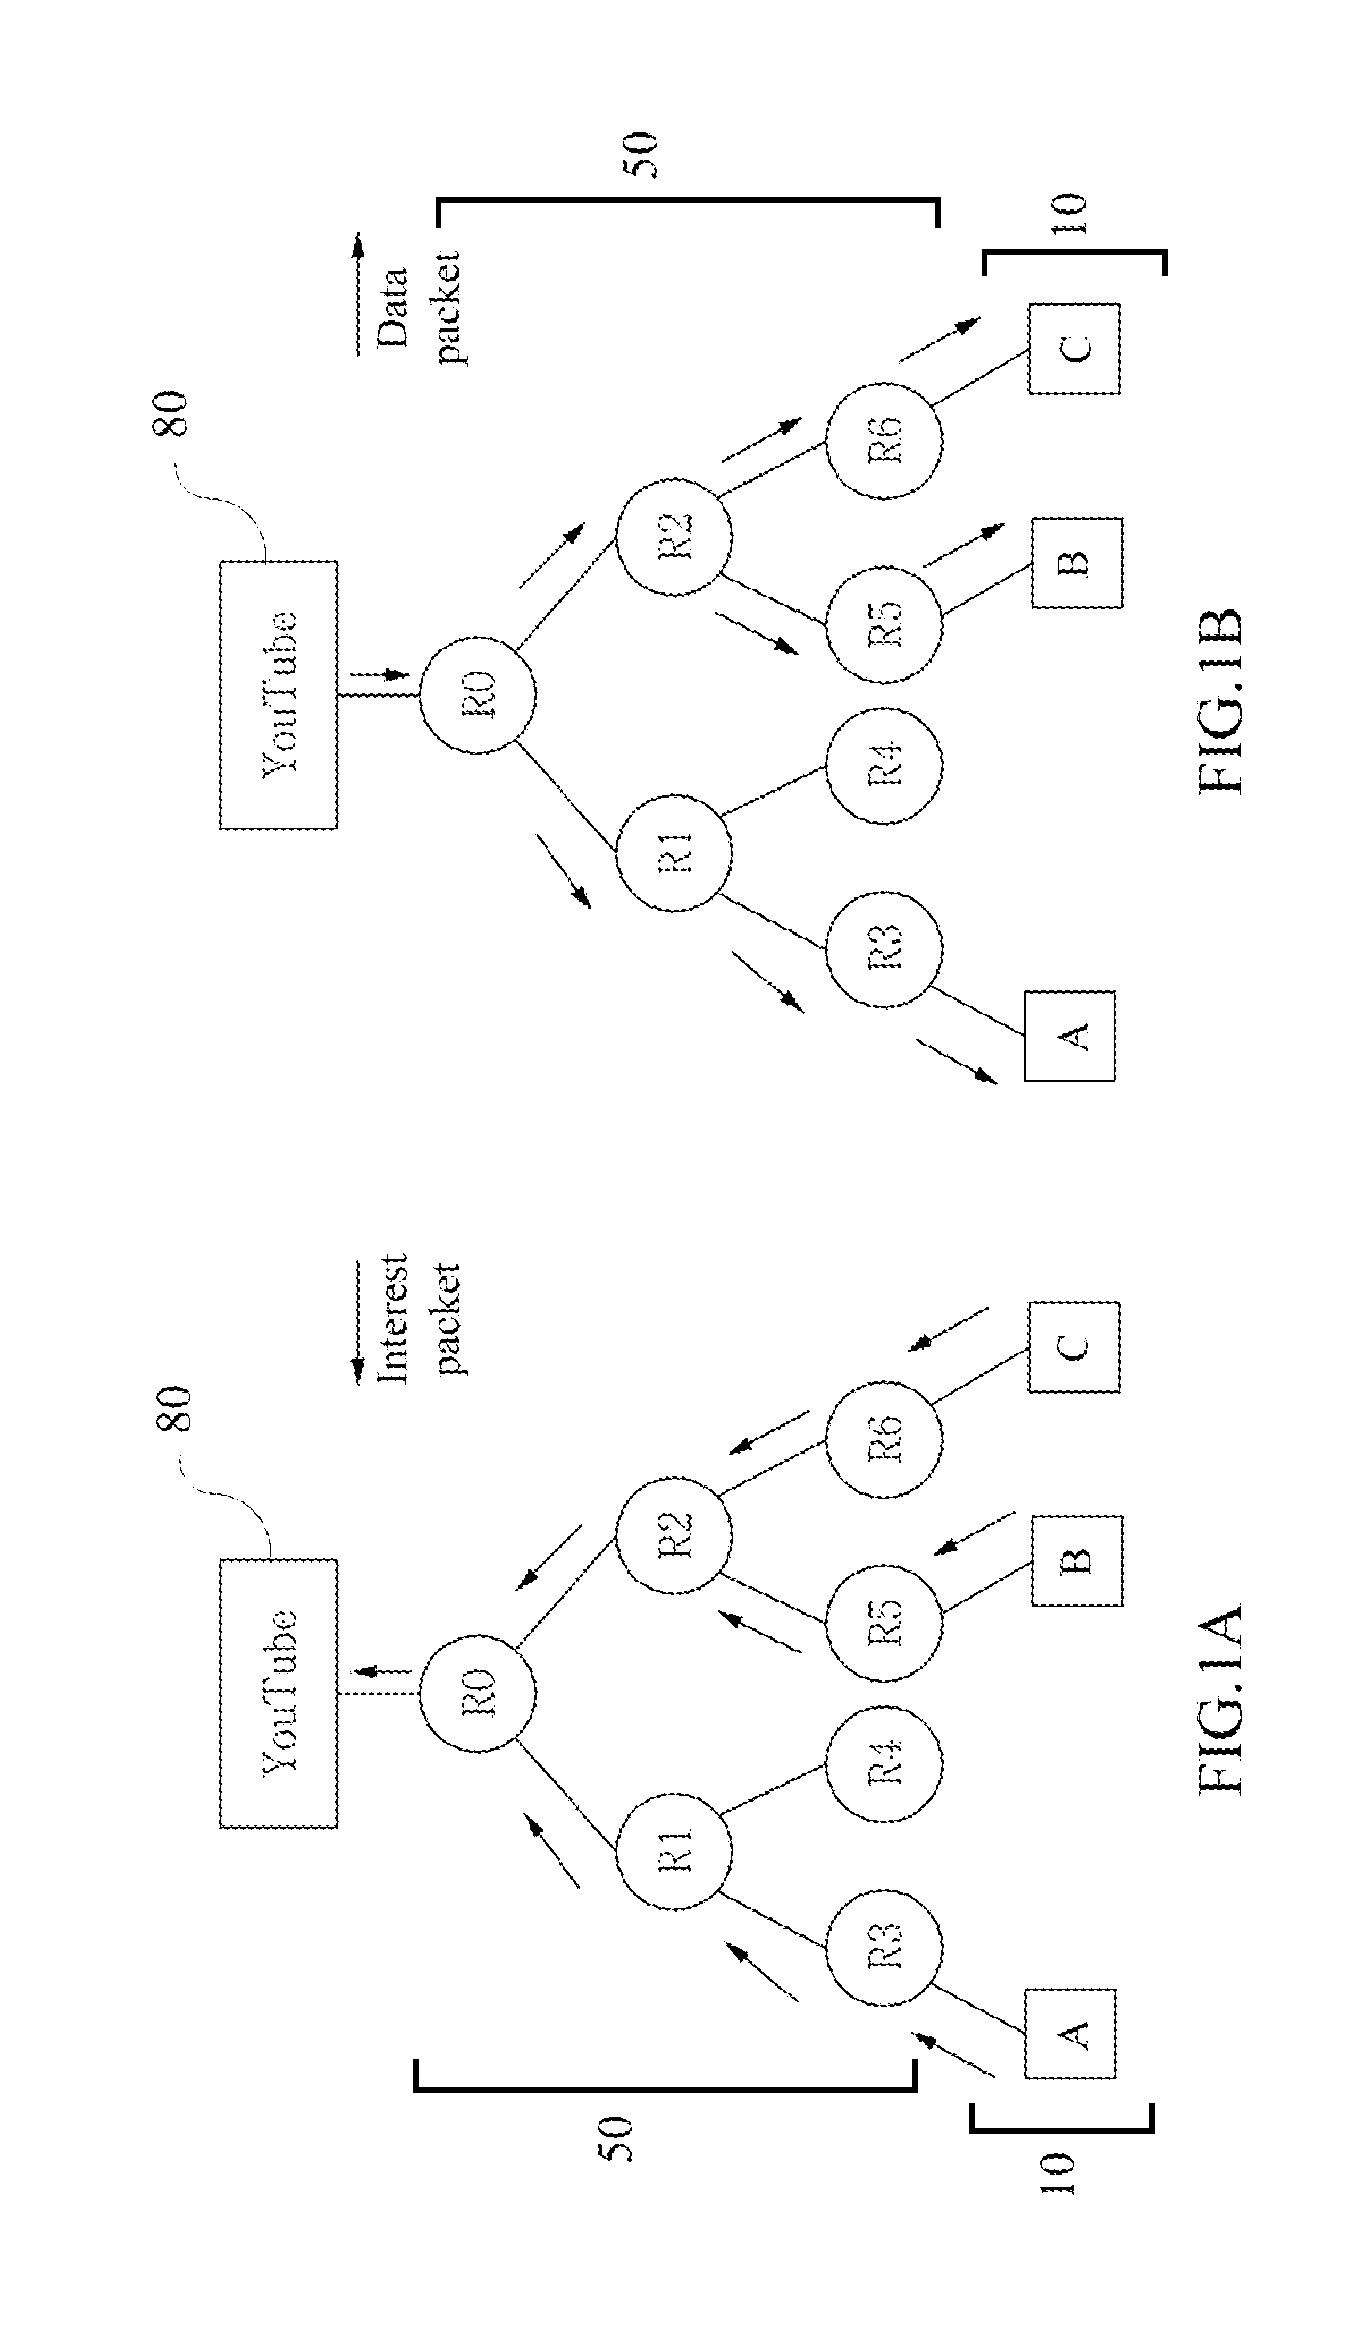 Content centric networking system providing differentiated service and method of controlling data traffic in content centric networking providing differentiated service